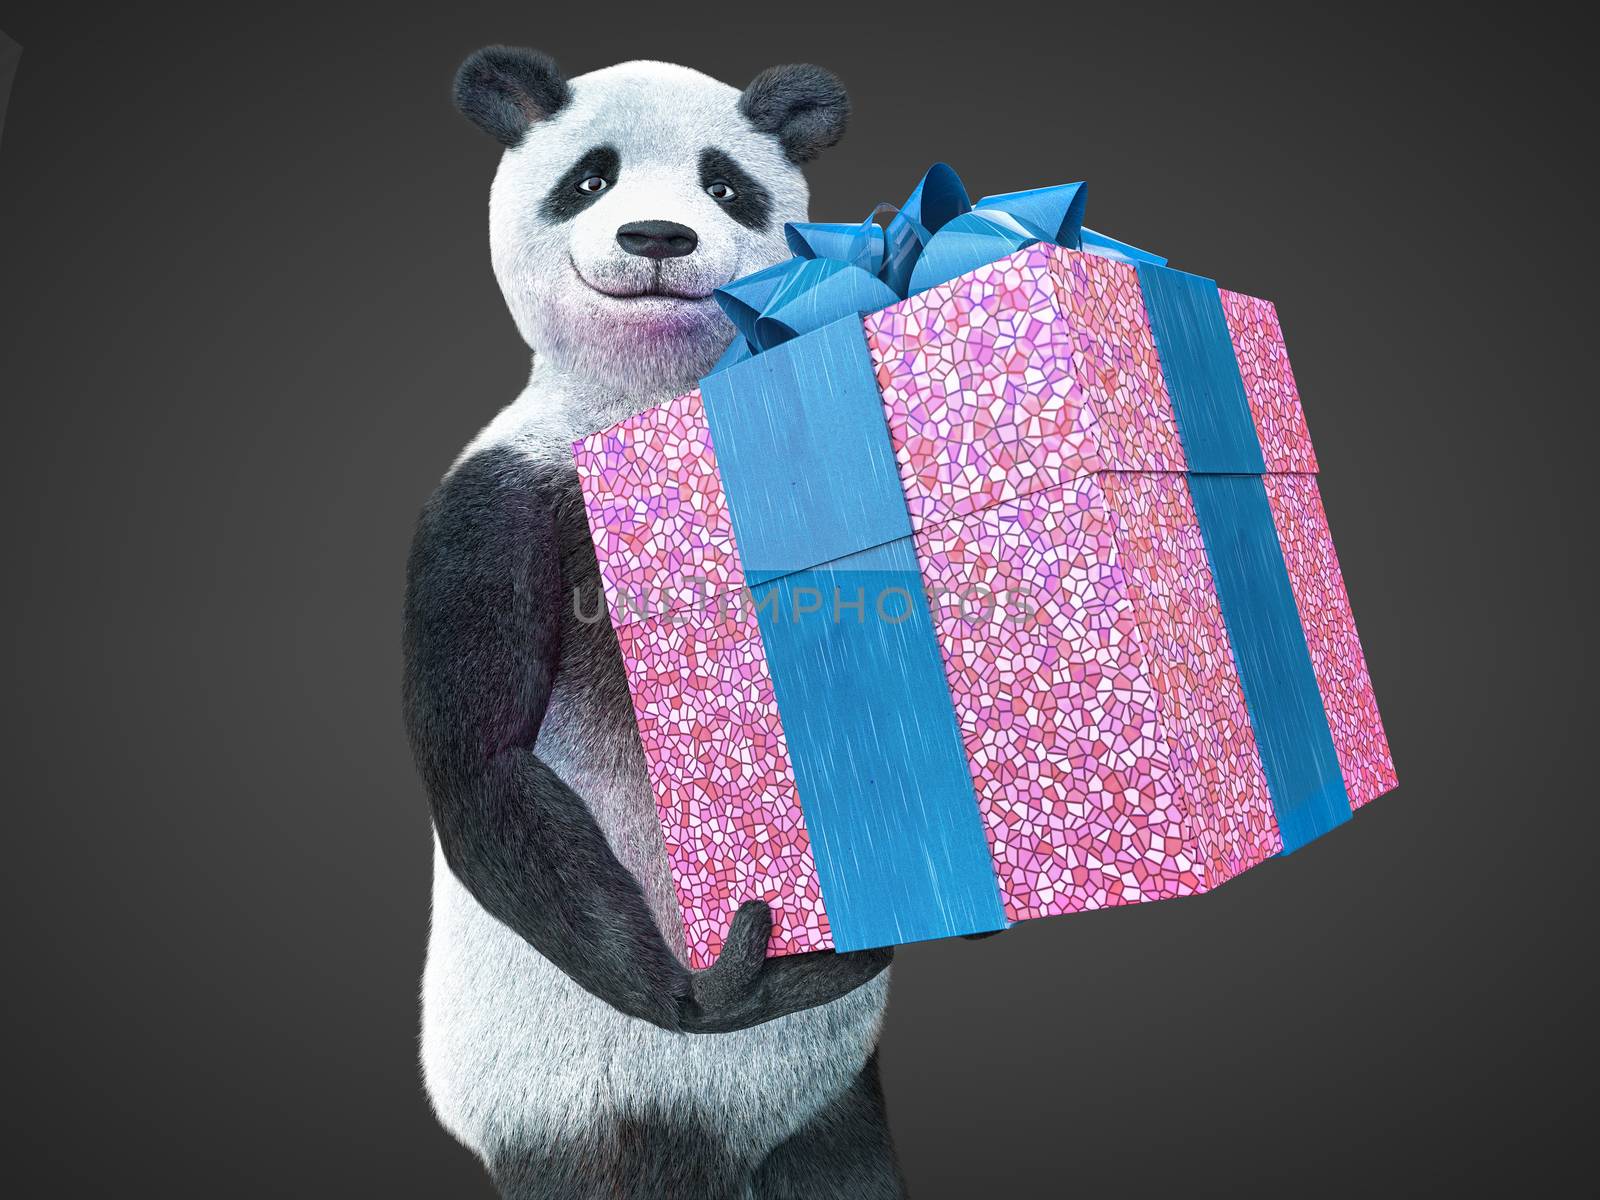 panda animail character gift box surprise holidays standing on dark background isolated download buy picture by xtate